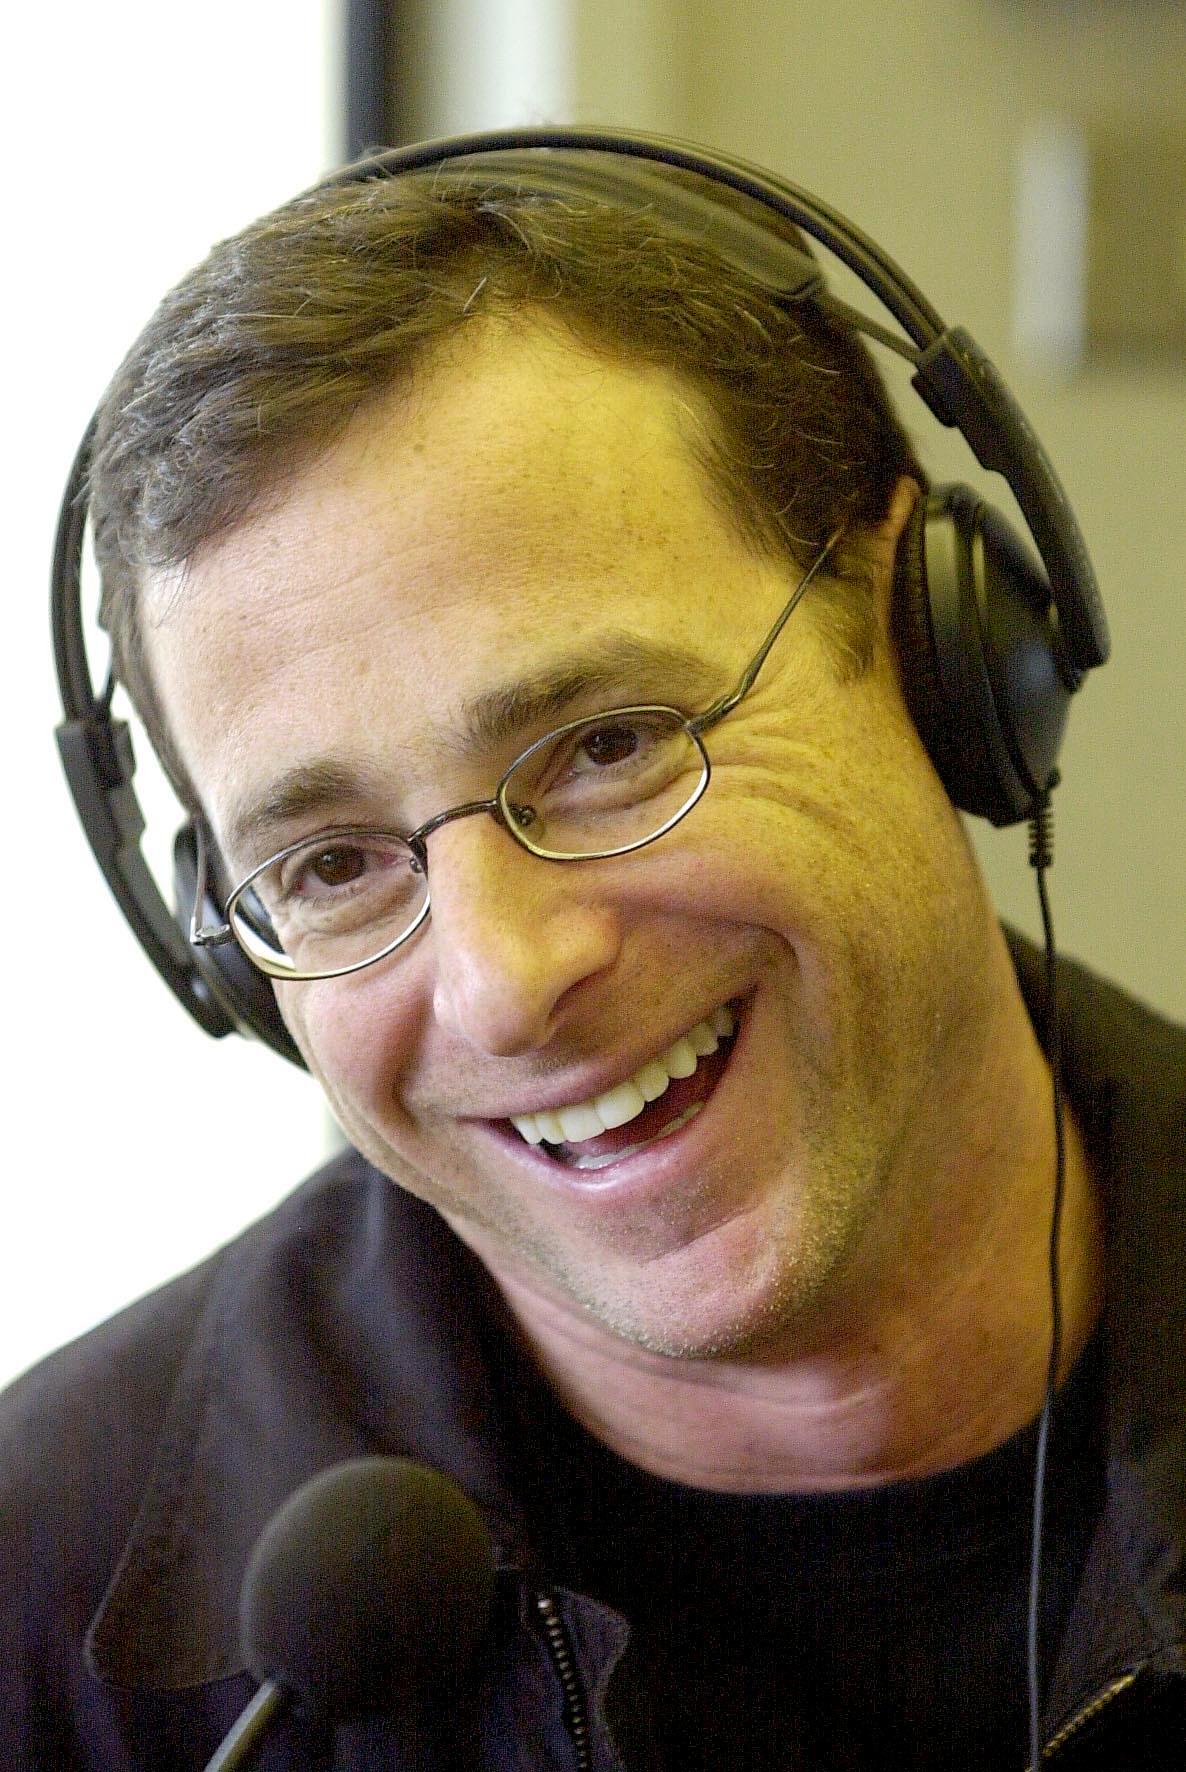 Bob Saget 911 Call: 'He's Not Breathing, Has No Pulse'